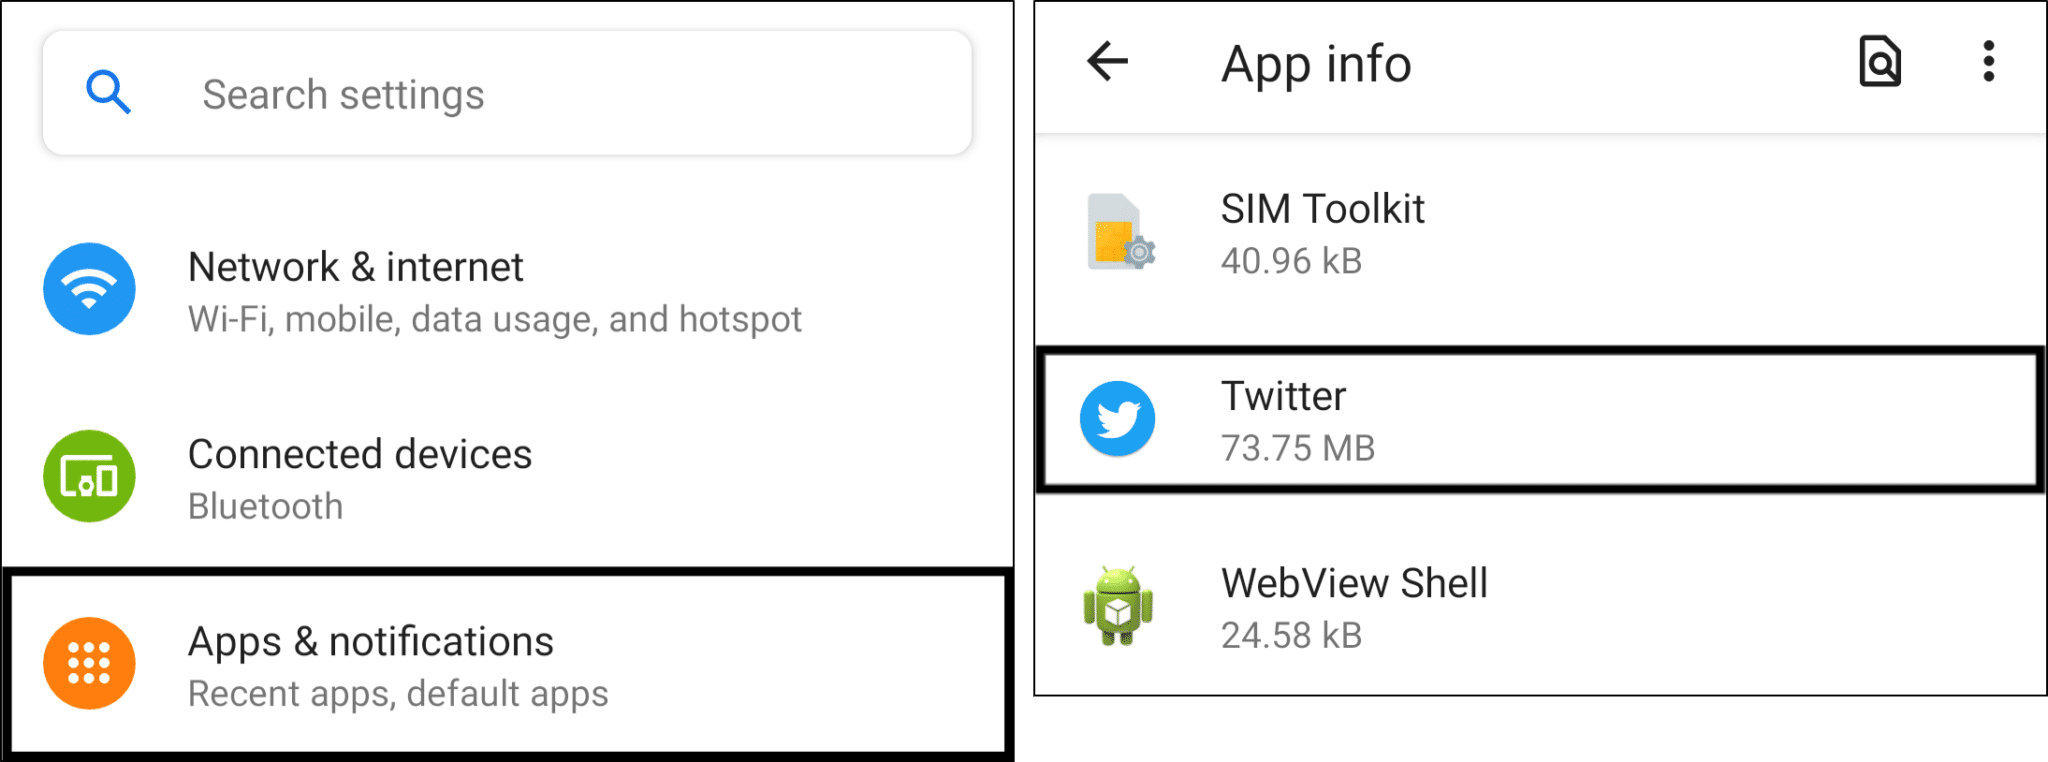 access twitter settings in system settings on Android